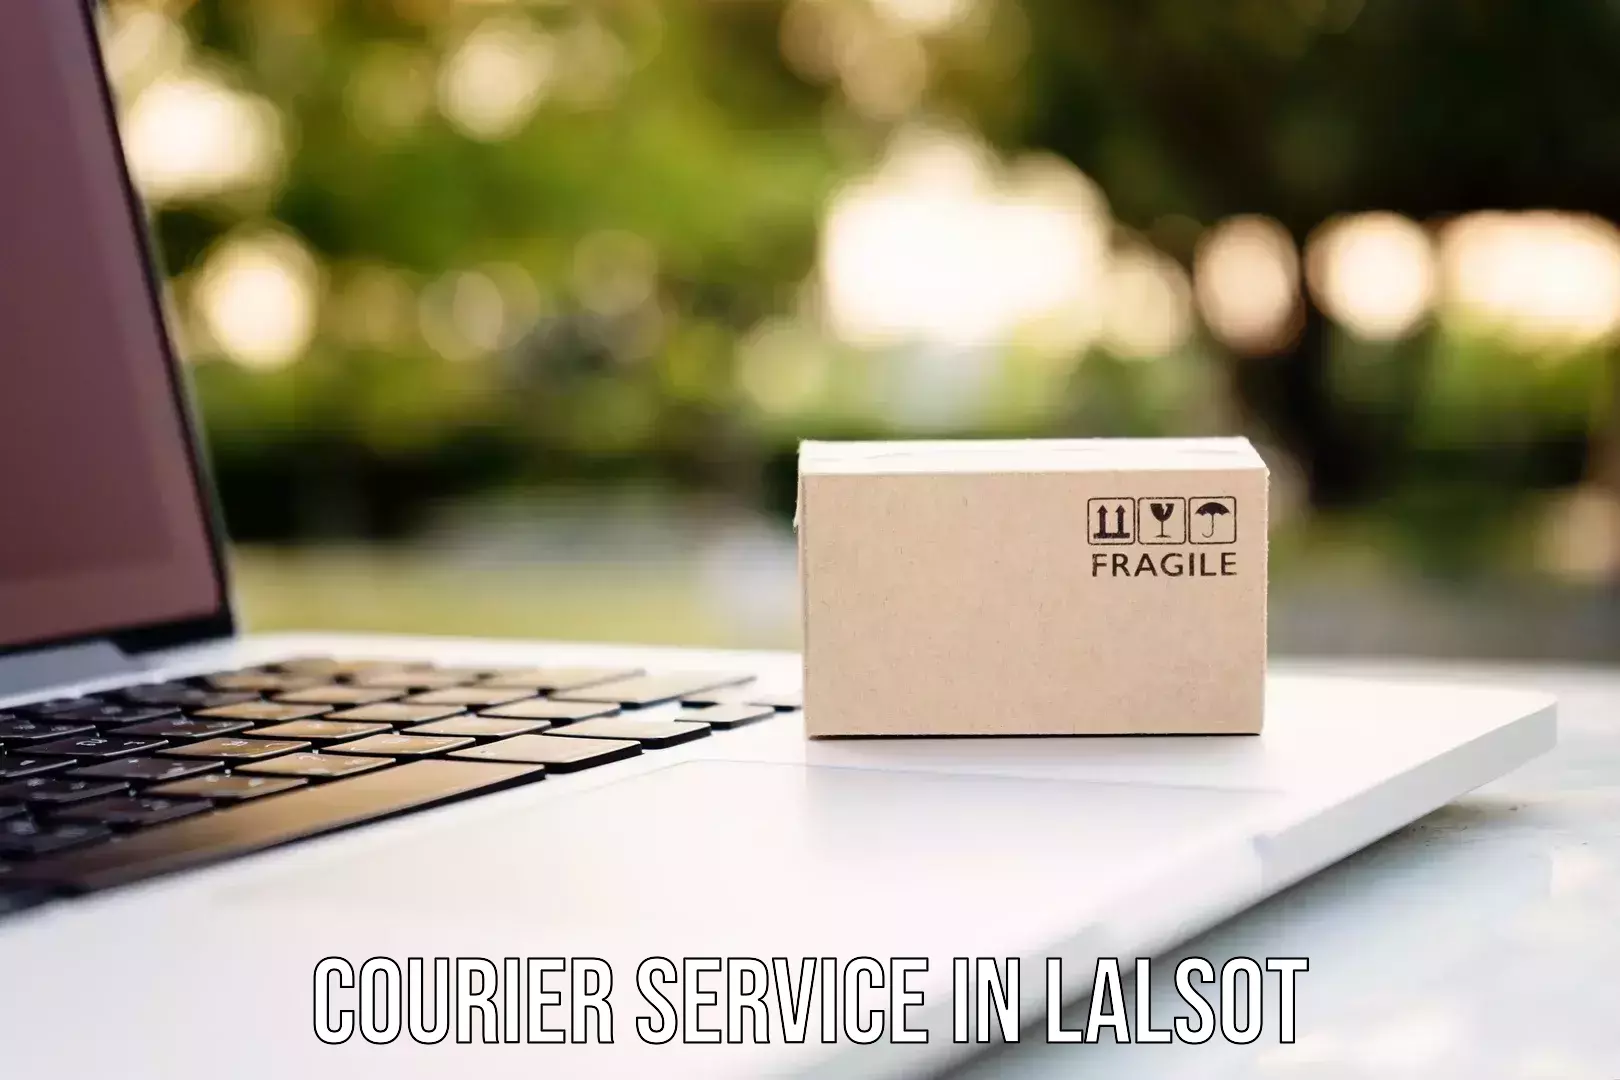 24-hour courier service in Lalsot